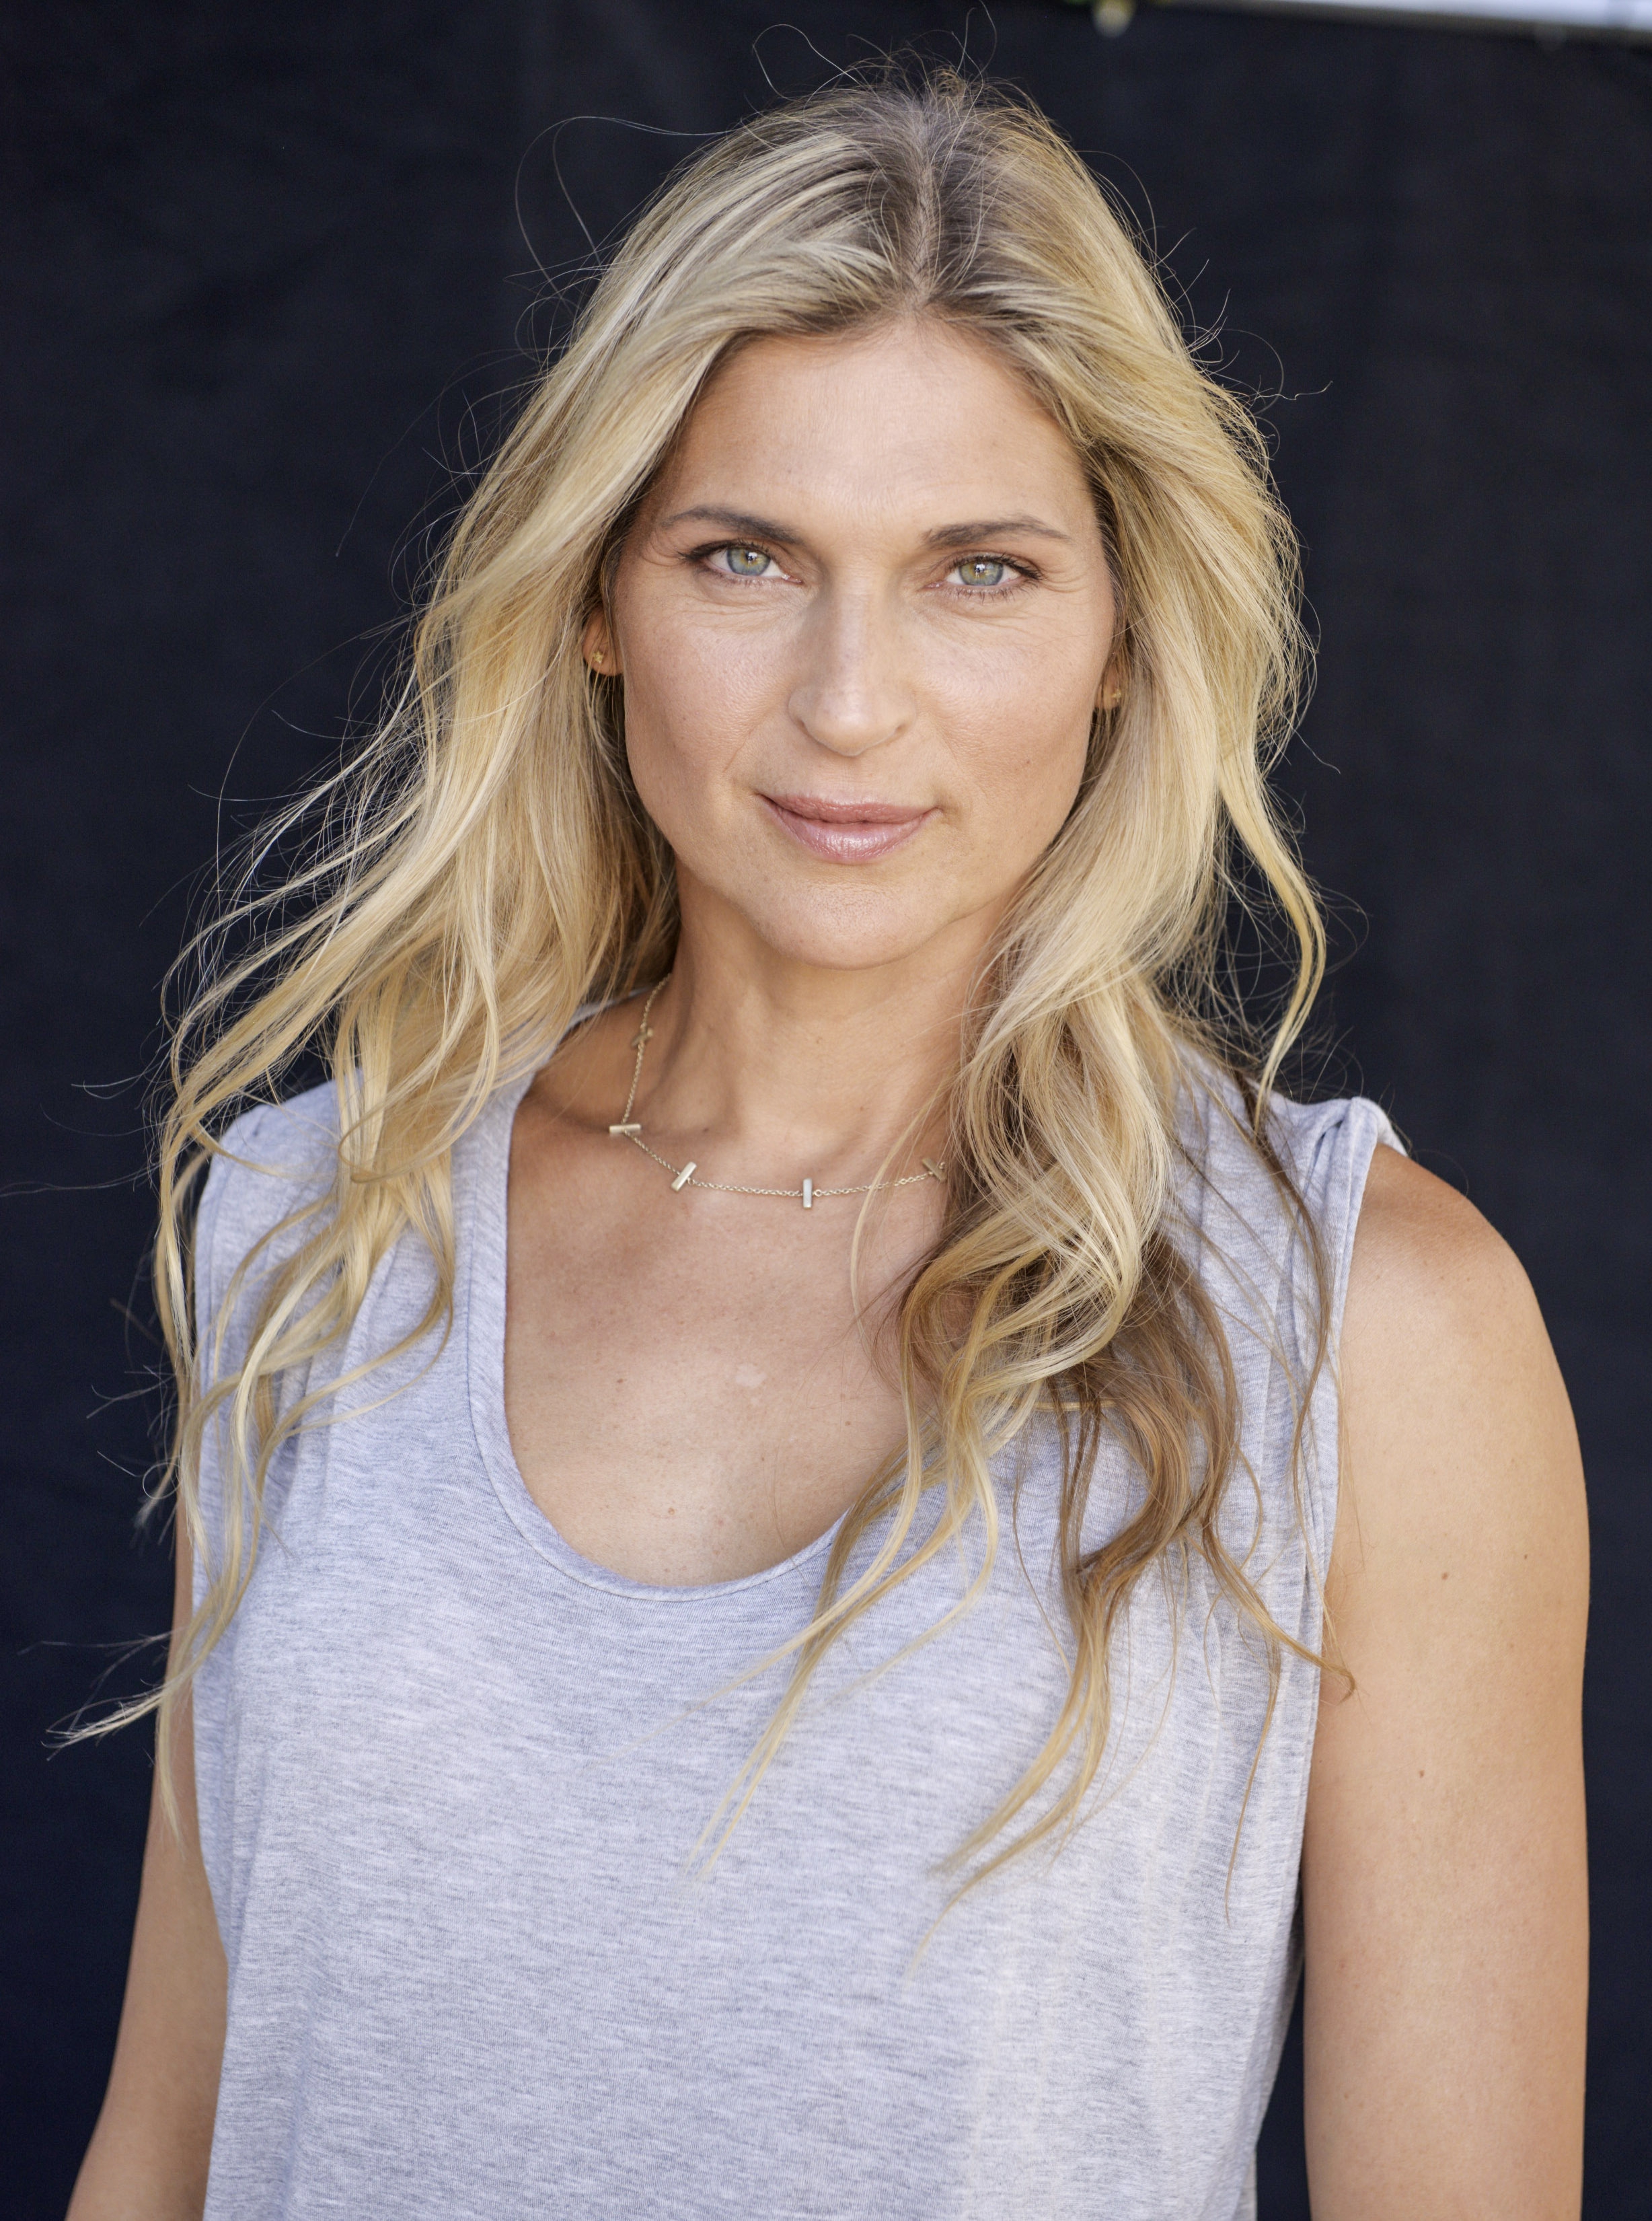 Interview with Gabby Reece